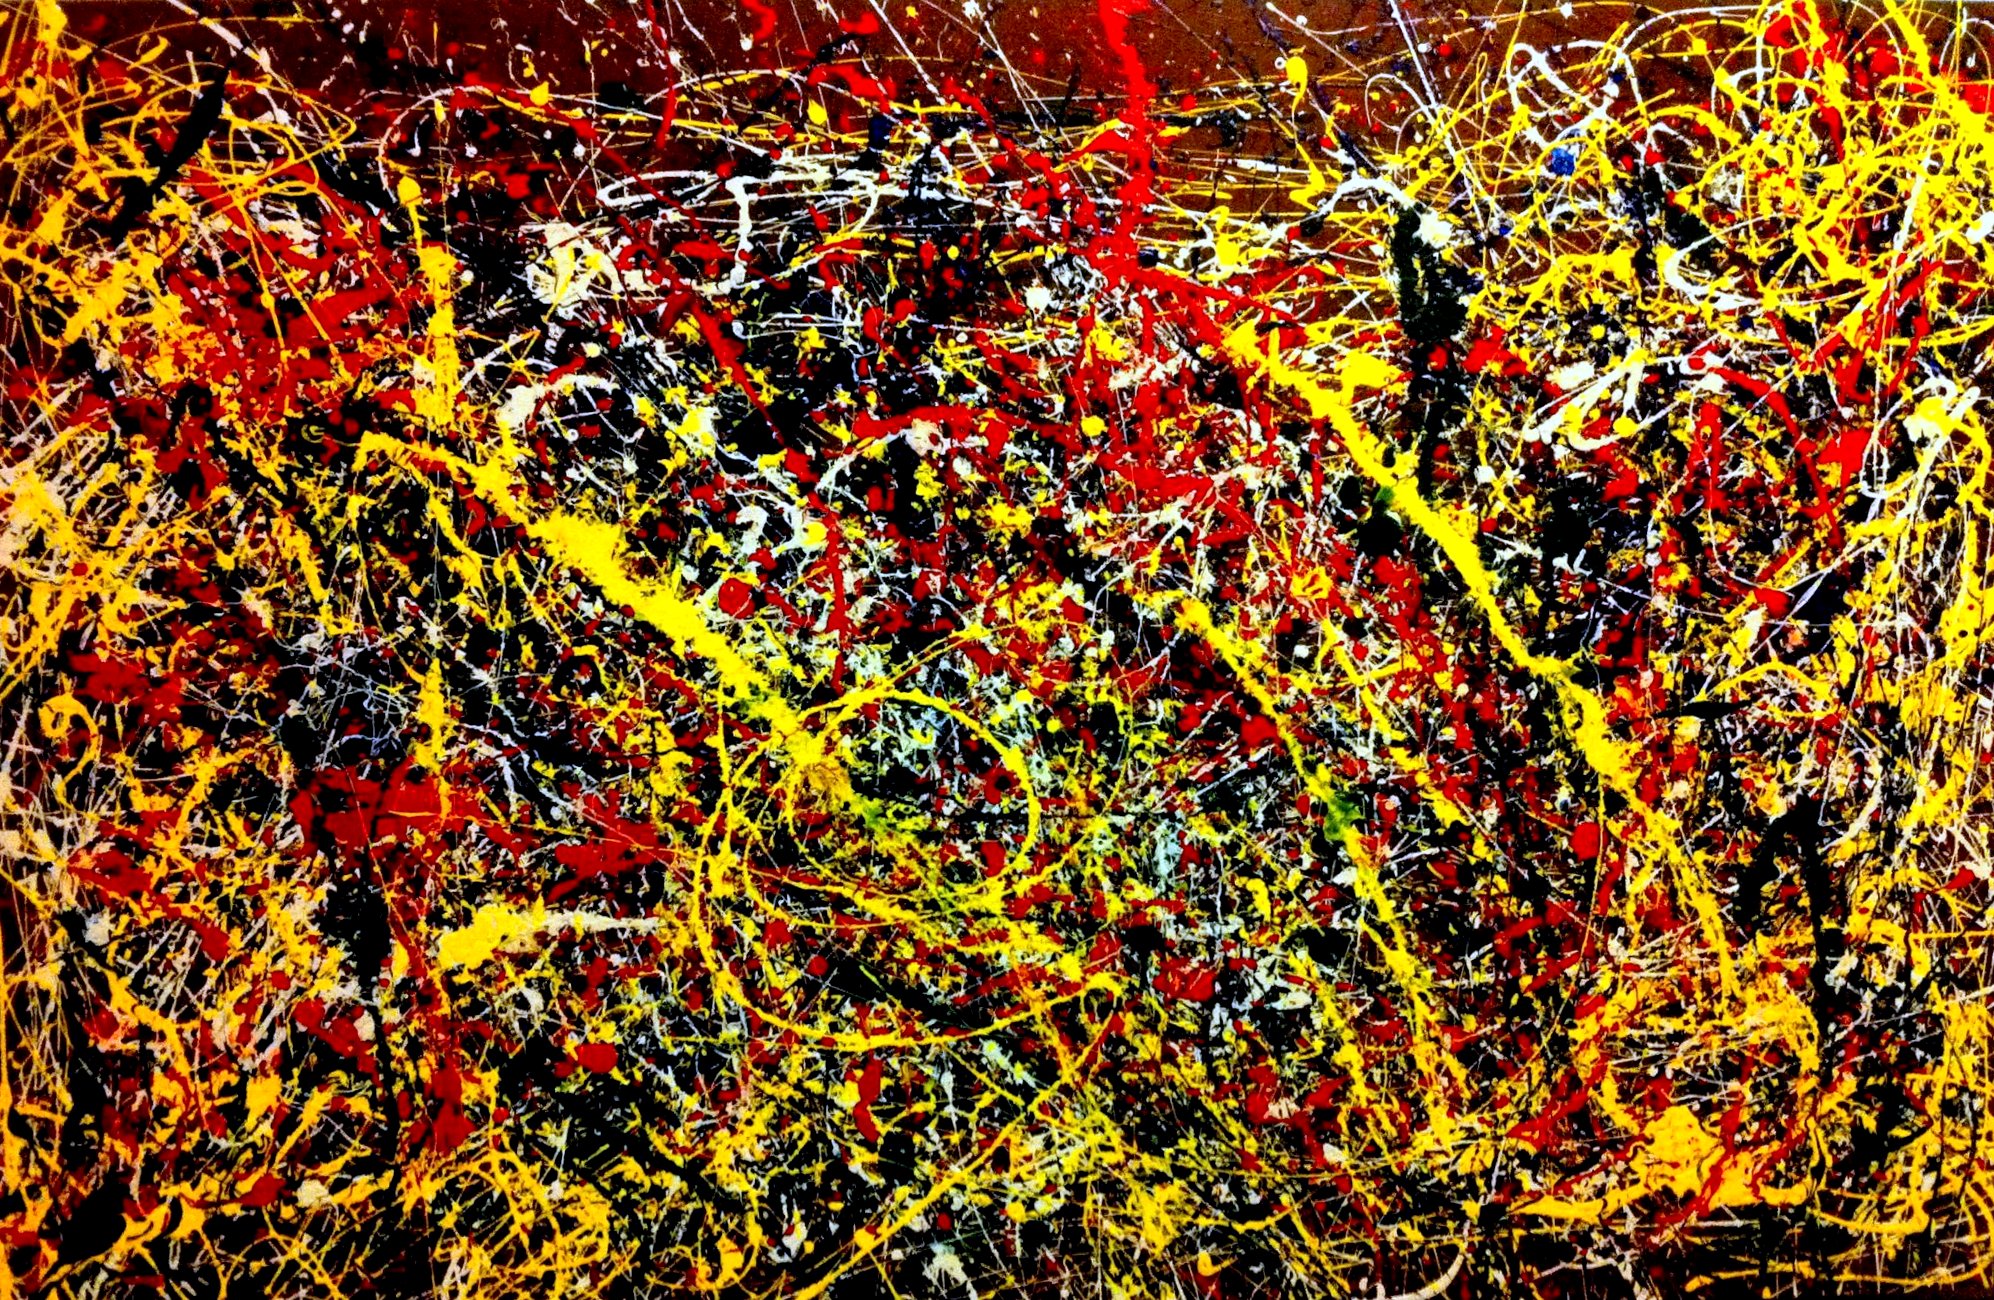 Jackson Pollock's art comes to mind during a makeup explosion disaster... (Source: Pinterest.com)